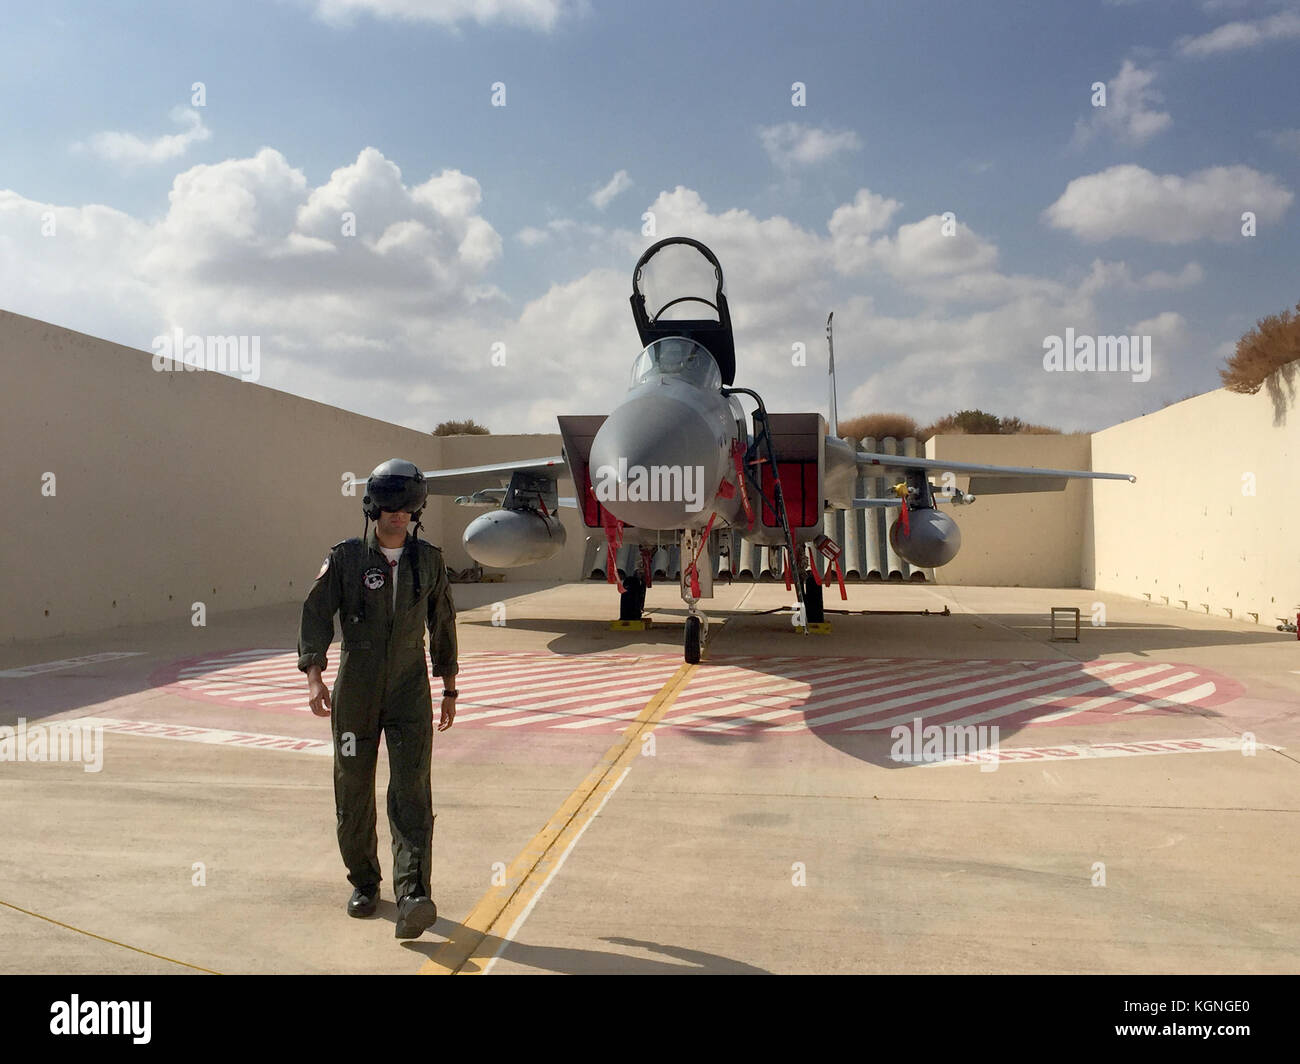 Uvda, Israel. 8th Nov, 2017. A fighter pilot of the Israeli Air Force stands in front of his combat jet during the Air Force training 'Blue Flag' in Uvda, Israel, 8 November 2017. Germany is taking part for the first time at the exercise in the Isreali desert where more than eight nations in total are participating. Credit: Sara Lemel/dpa/Alamy Live News Stock Photo